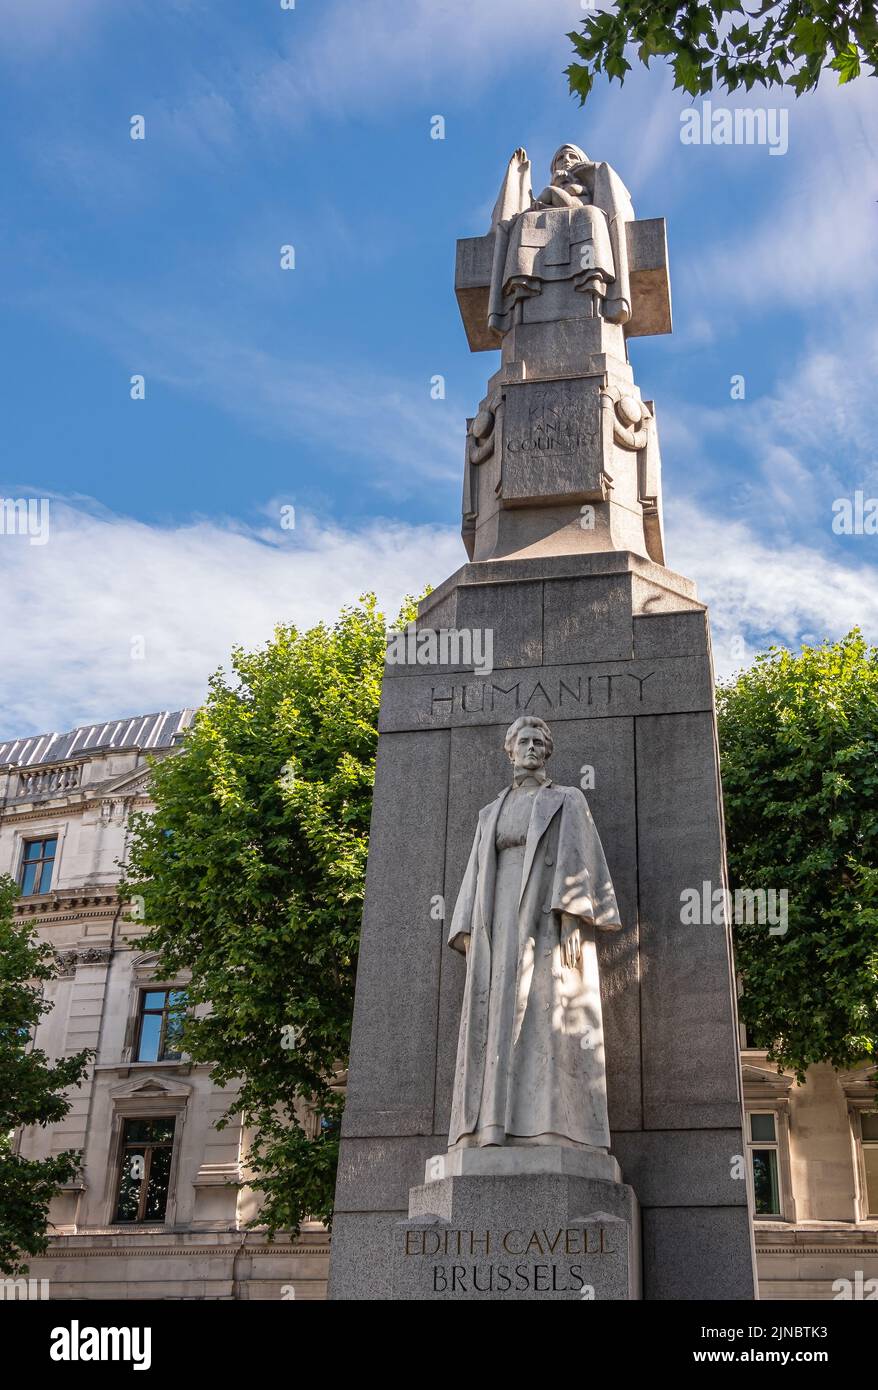 London, UK- July 4, 2022: Off Trafalgar Square. Closeup of Edith Cavell Memorial is stone obelisk with Marble statues featuring her image and appealin Stock Photo